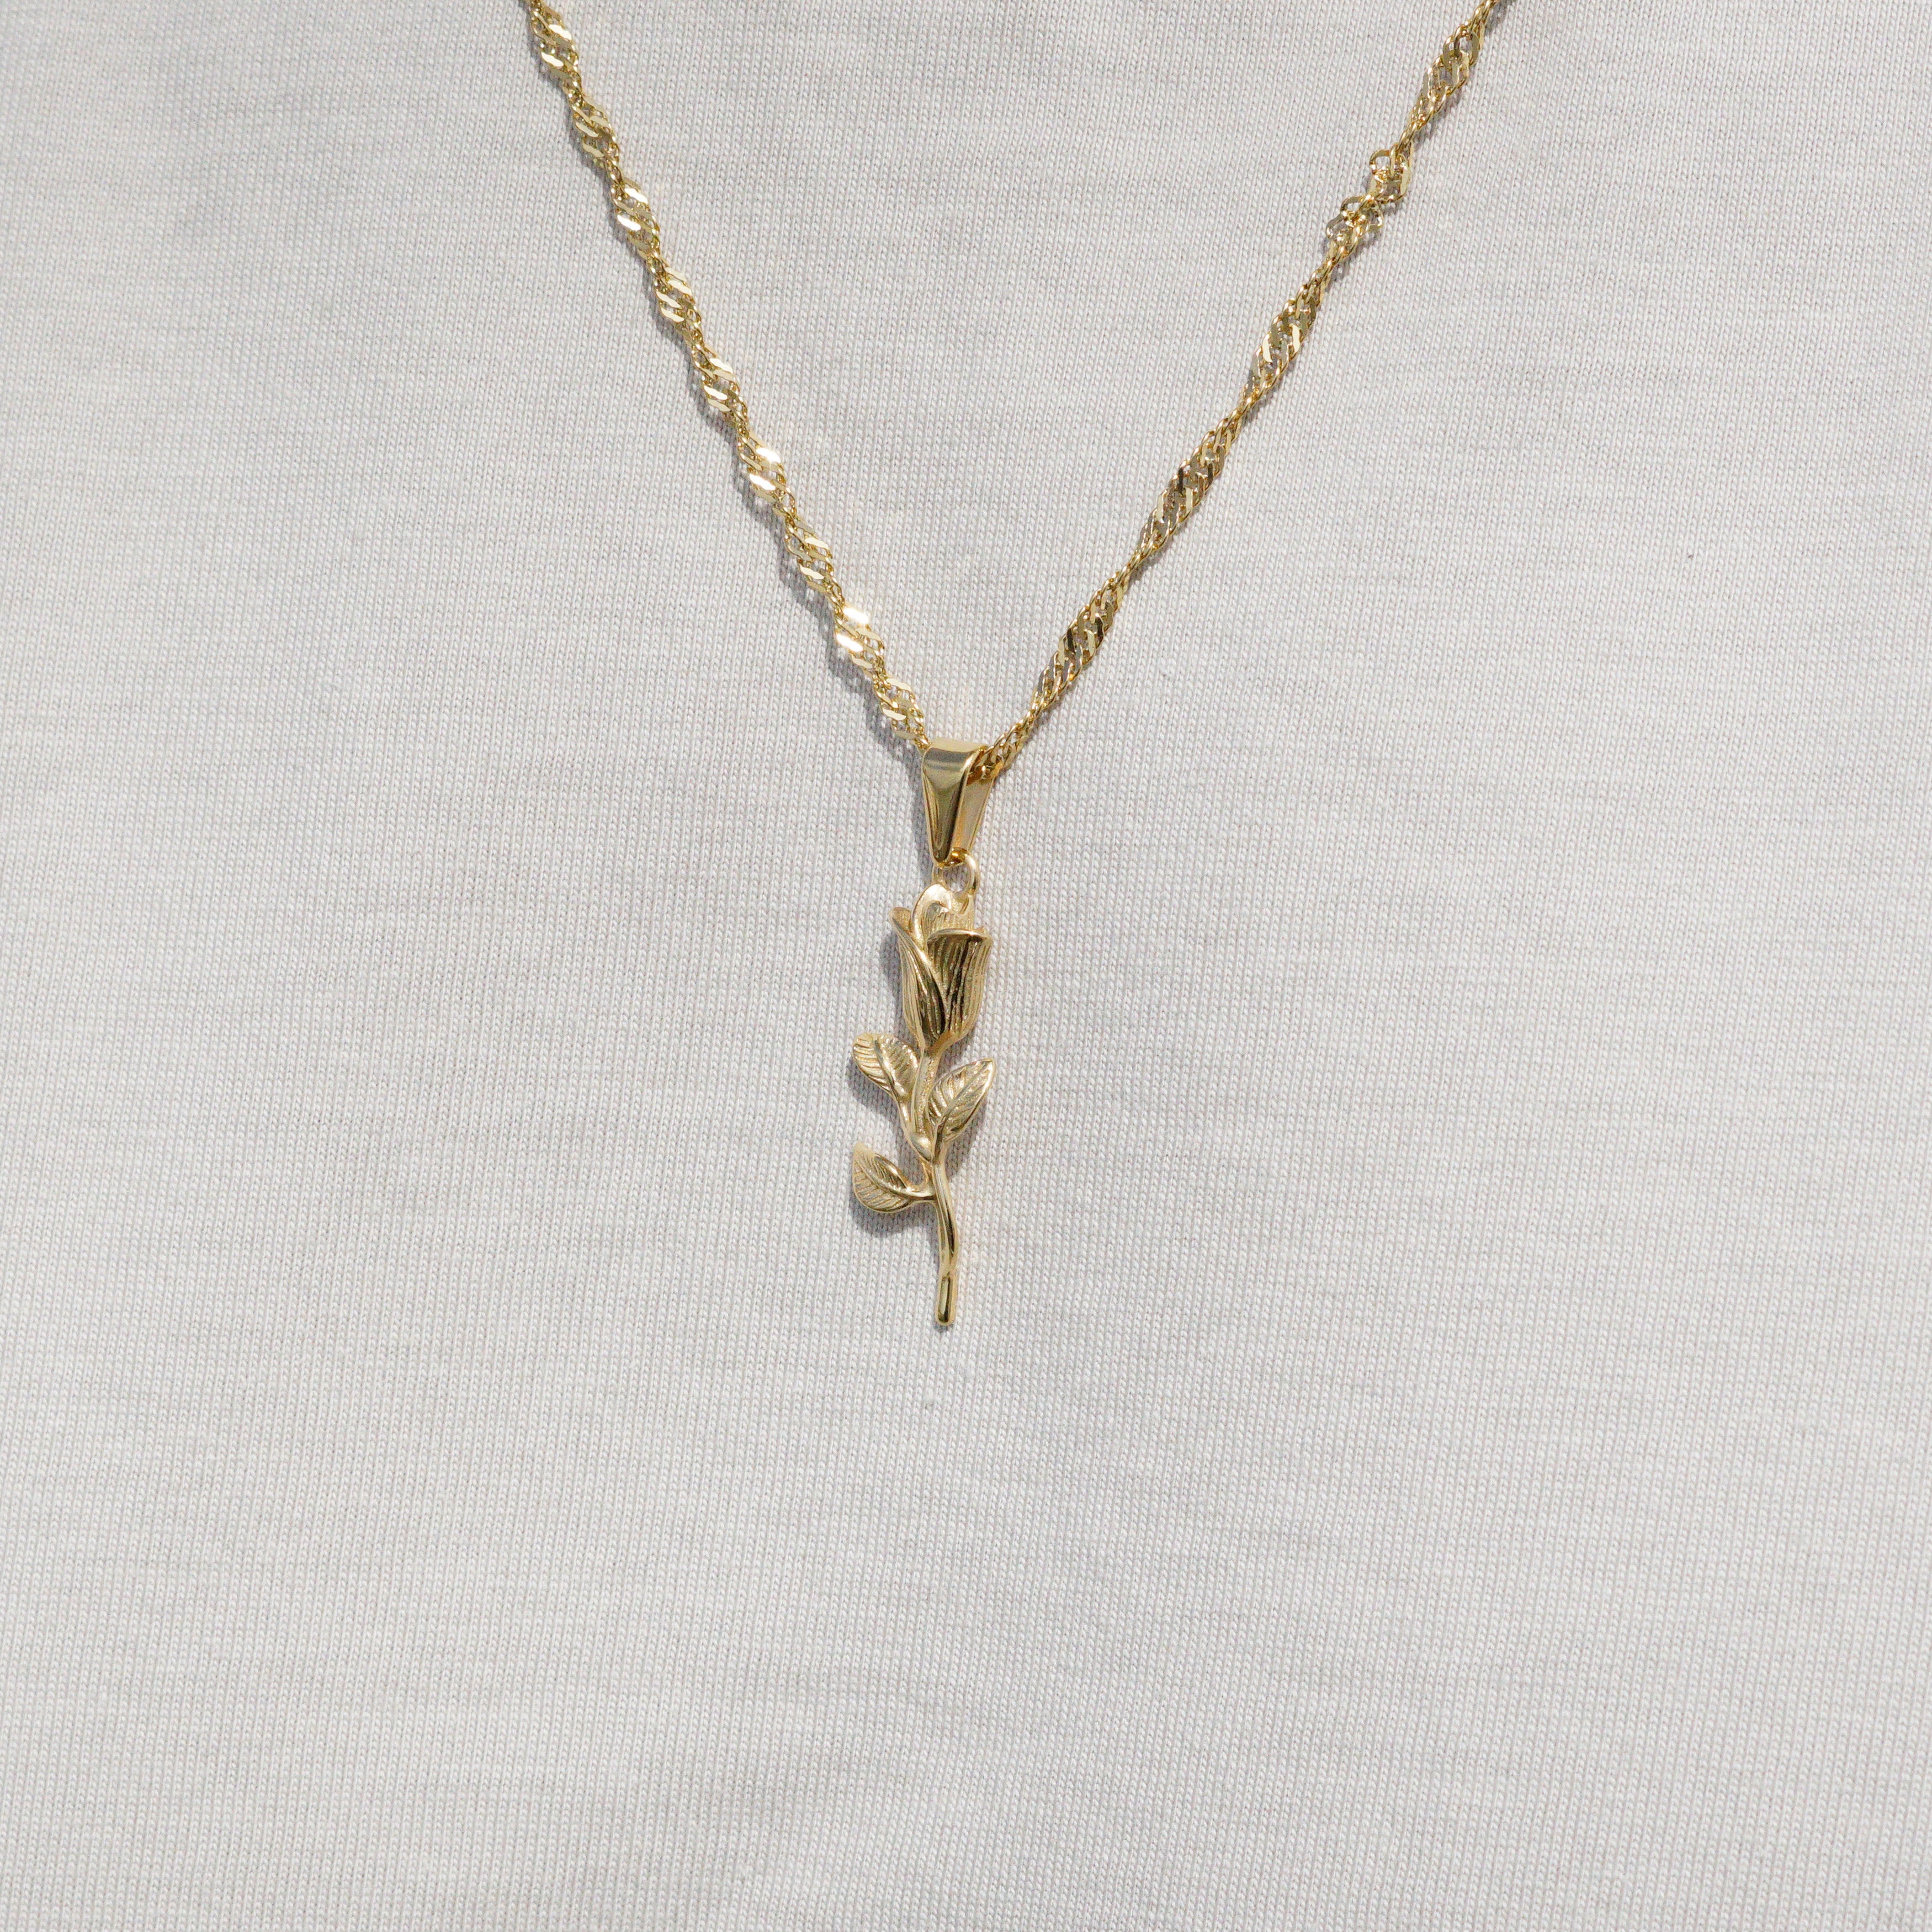 ROSE NECKLACE - GOLD TONE